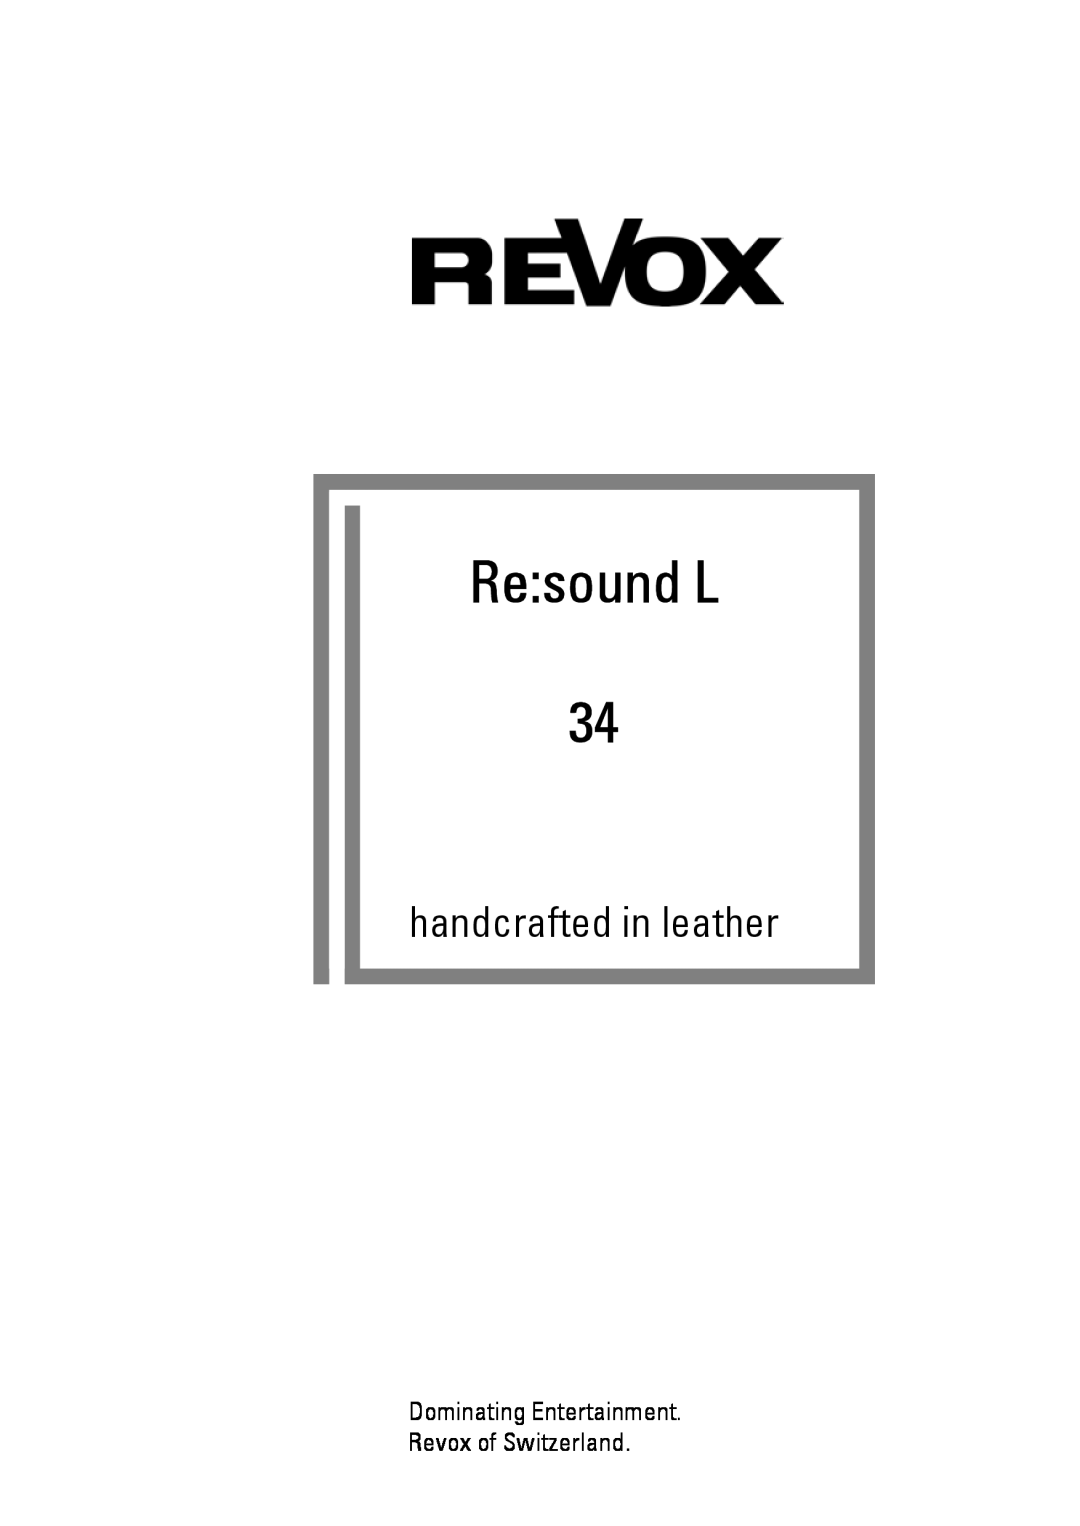 Revox Re:sound L 34 manual Re sound L, handcrafted in leather 